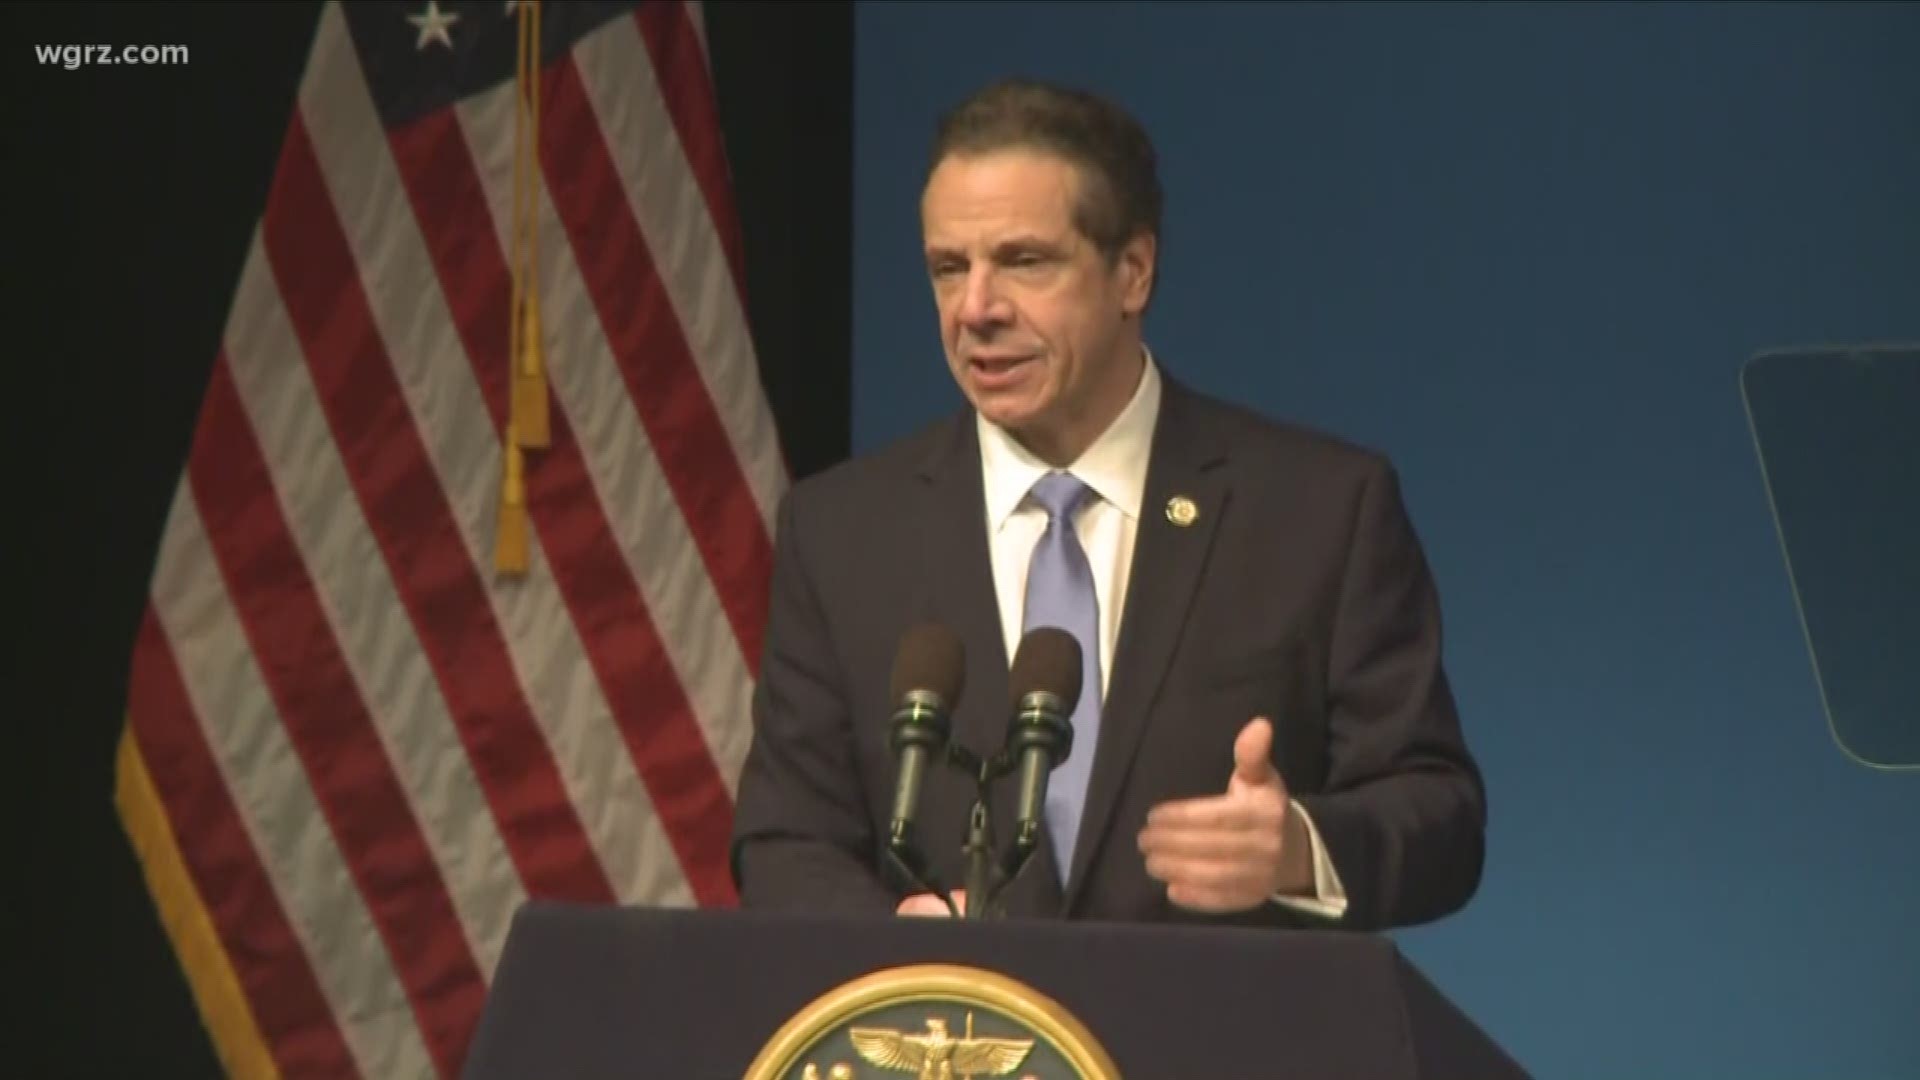 Cuomo Calls For Unity, Bashes Opponents